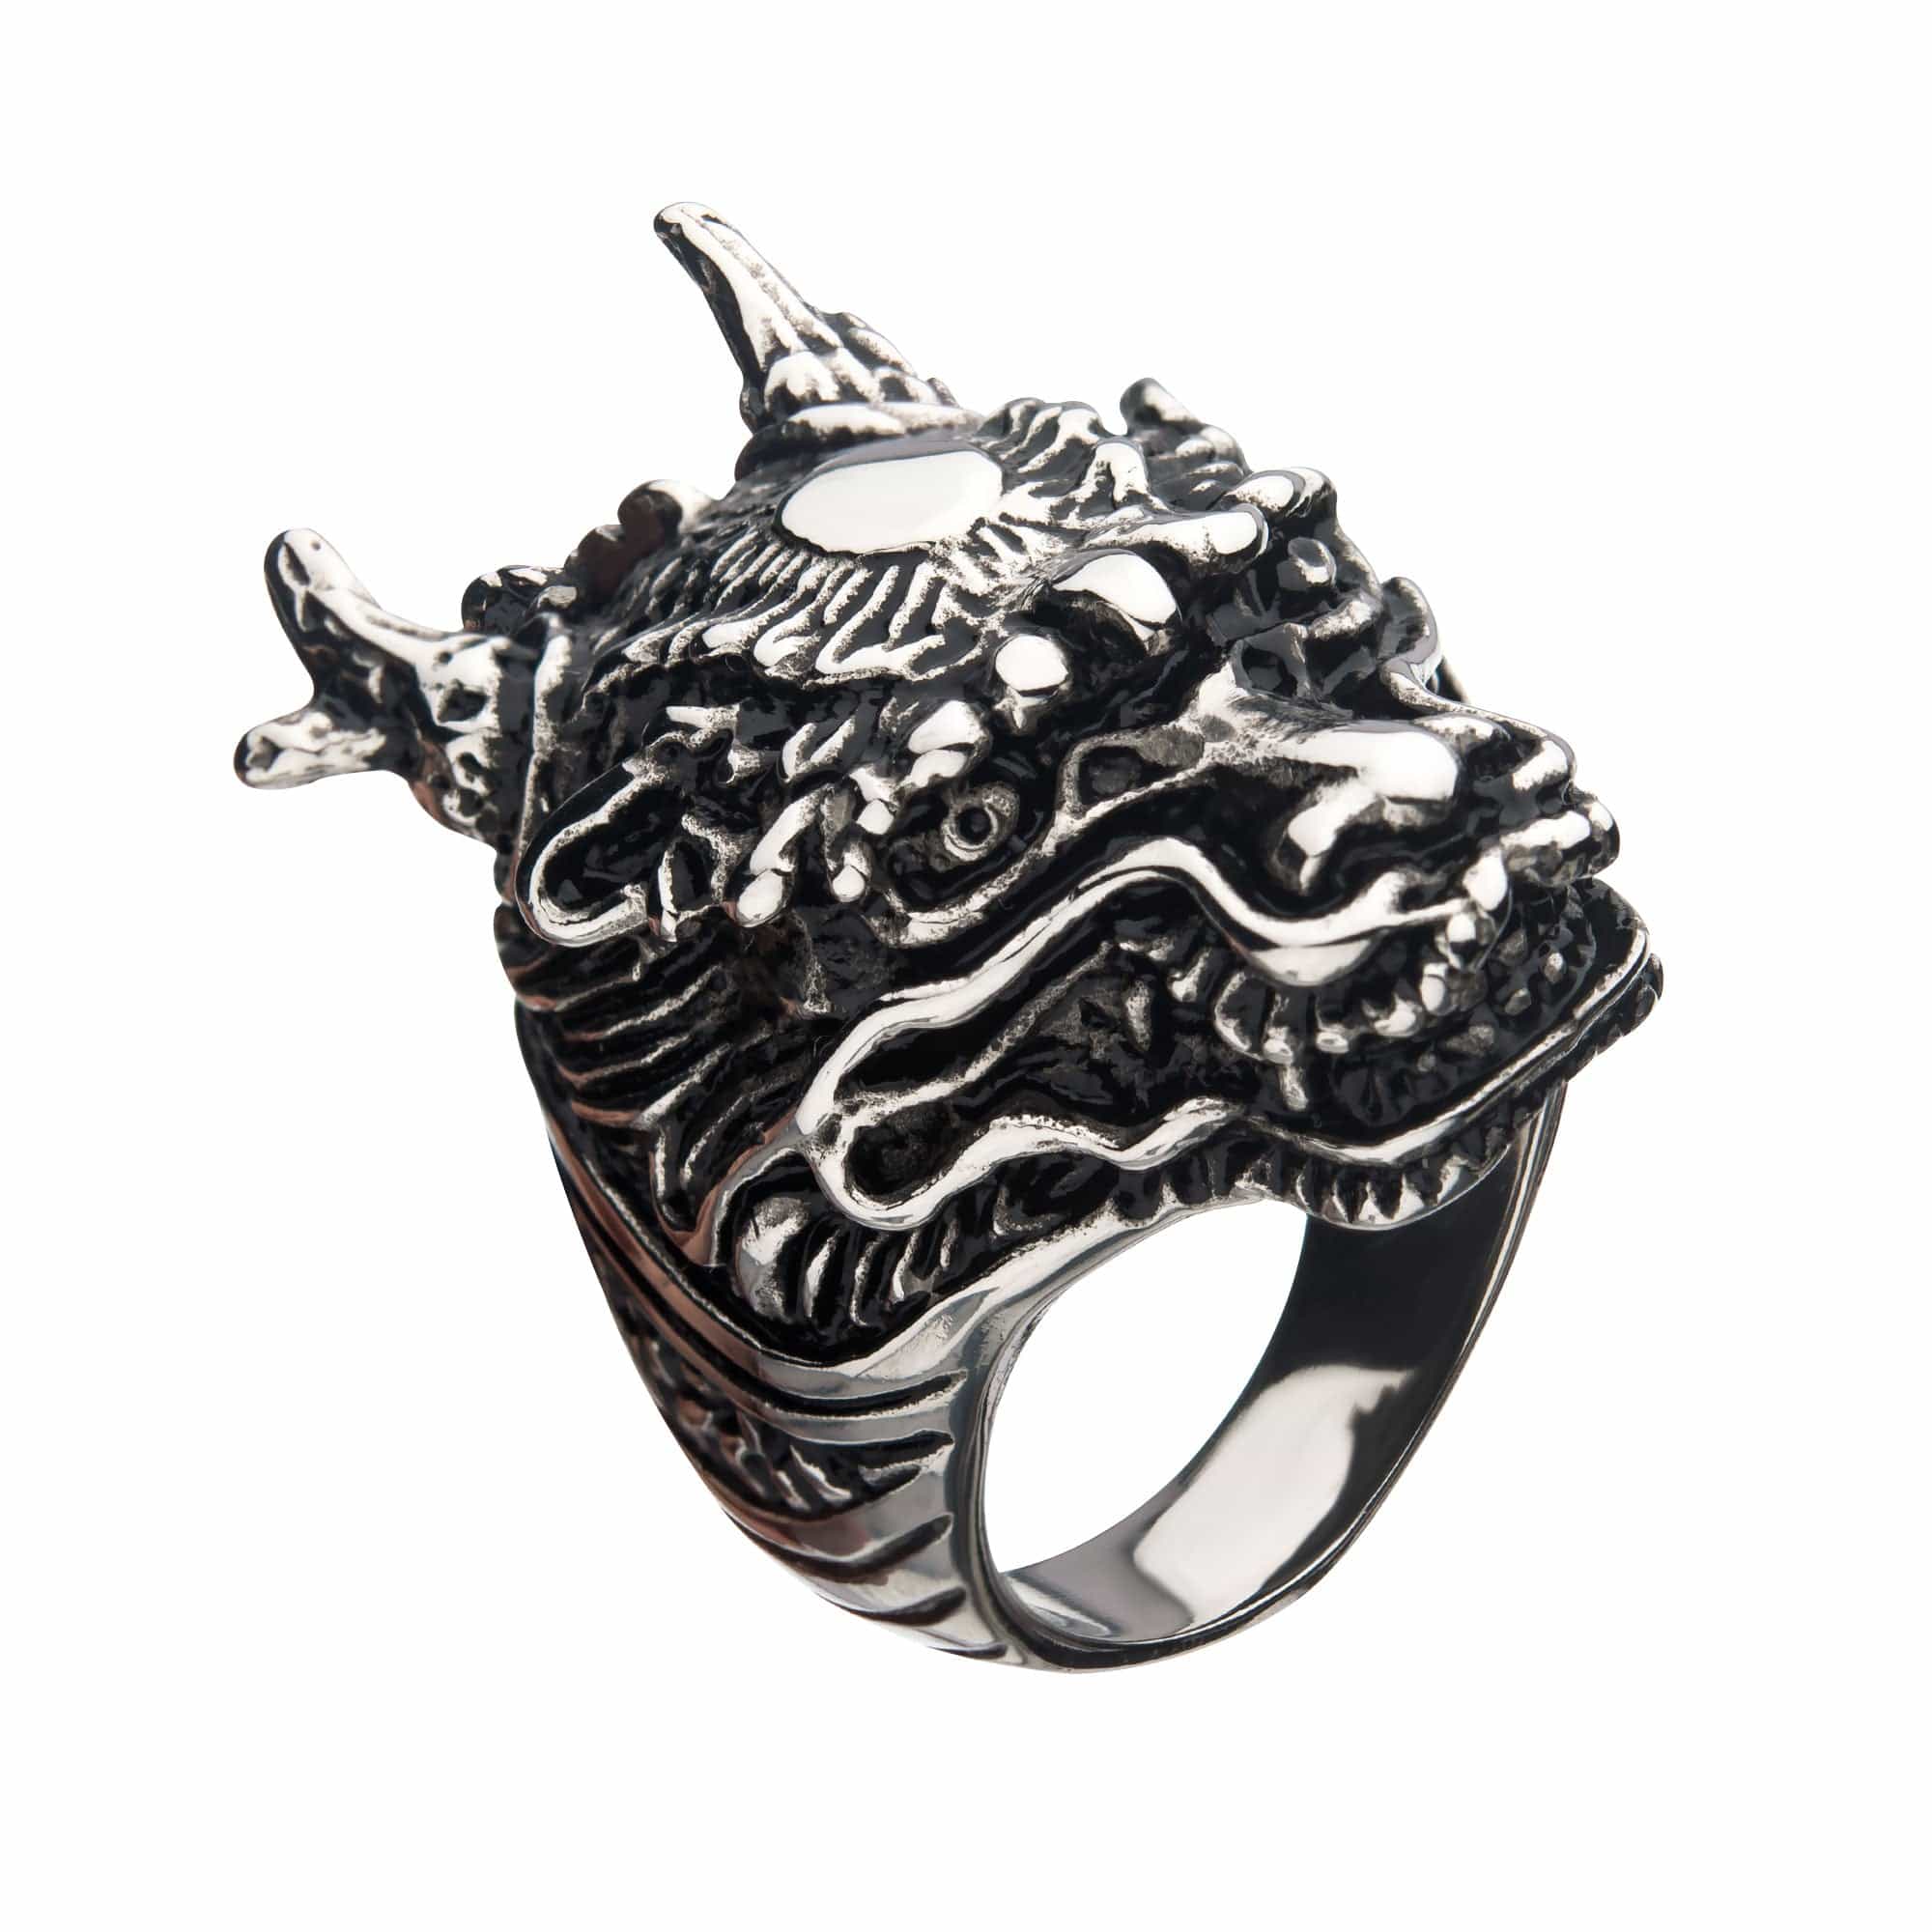 INOX JEWELRY Rings Antiqued Silver Tone Stainless Steel Oxidize Finish Wyvern Dragon Ring